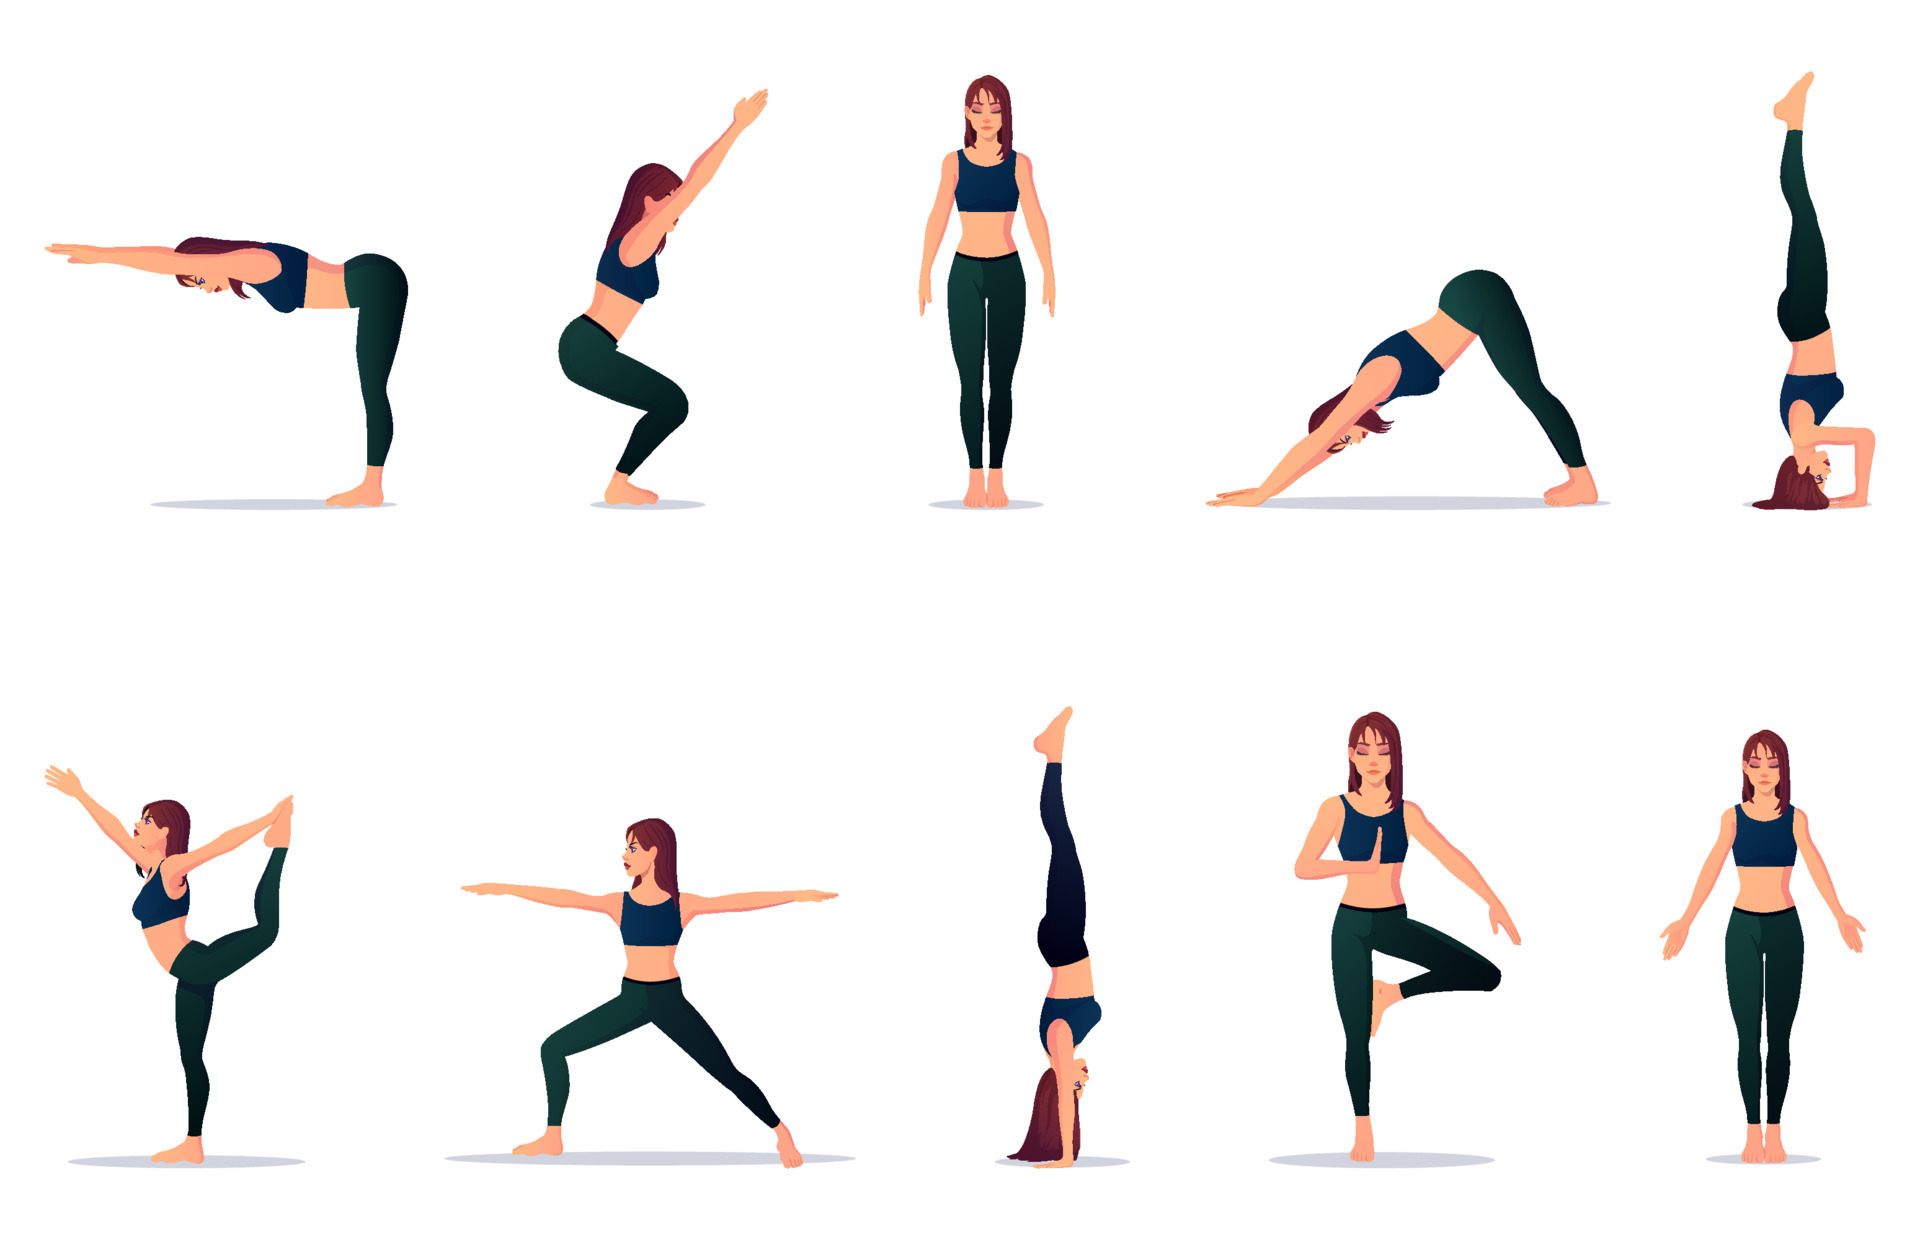 https://static.vecteezy.com/system/resources/previews/004/566/227/original/set-of-yoga-poses-fitness-pose-collection-premium-illustrations-vector.jpg